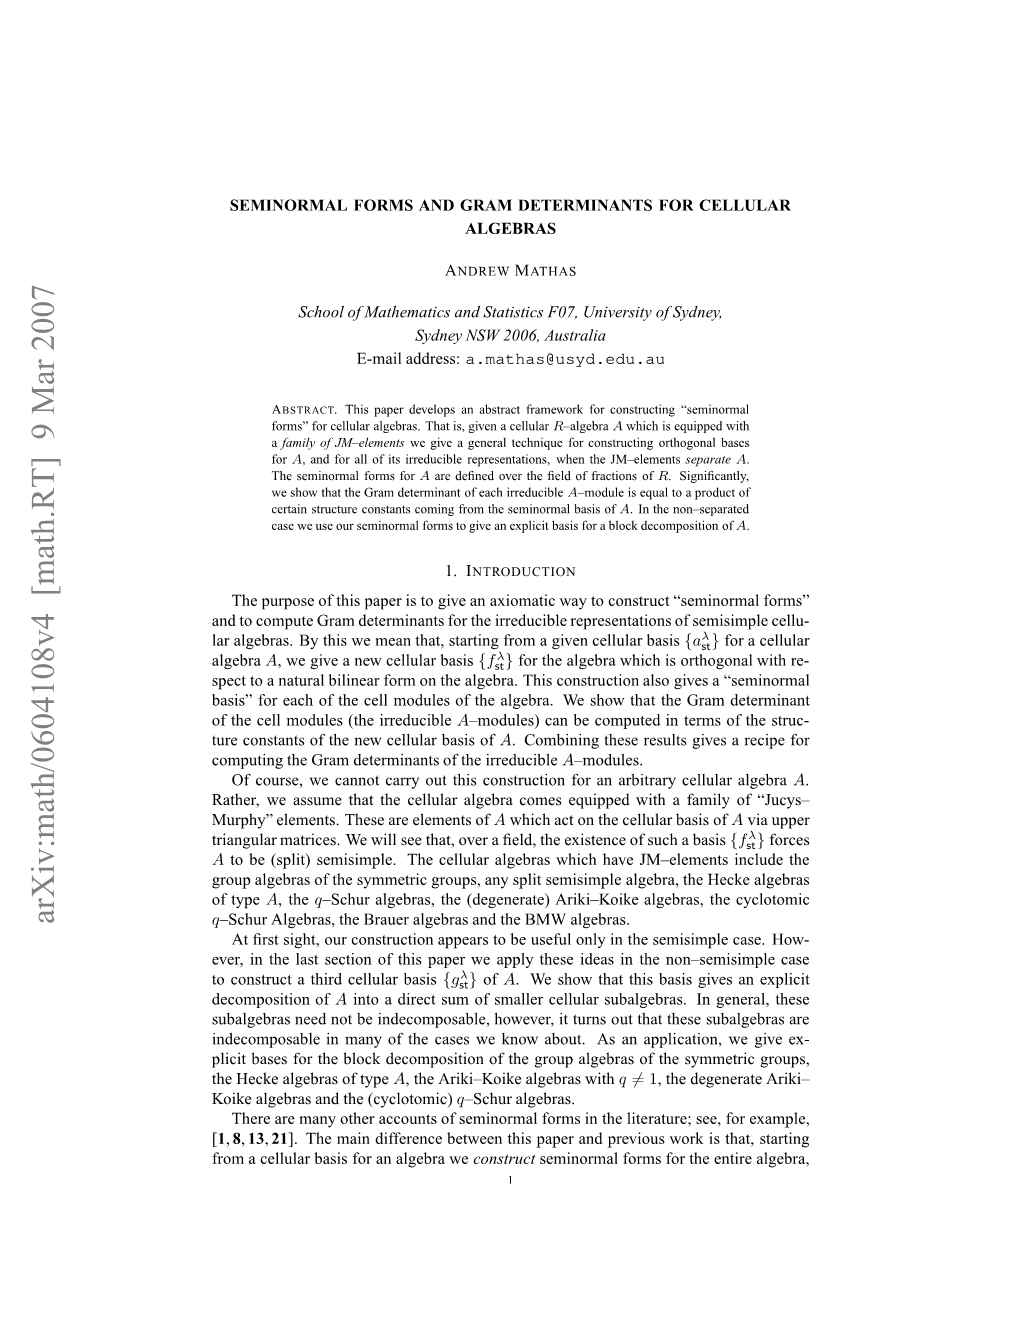 Arxiv:Math/0604108V4 [Math.RT] 9 Mar 2007 a Lers Yti Ema Ht Trigfo Ie Cell Given a from Starting That, Mean We This by Repres Irreducible Algebras